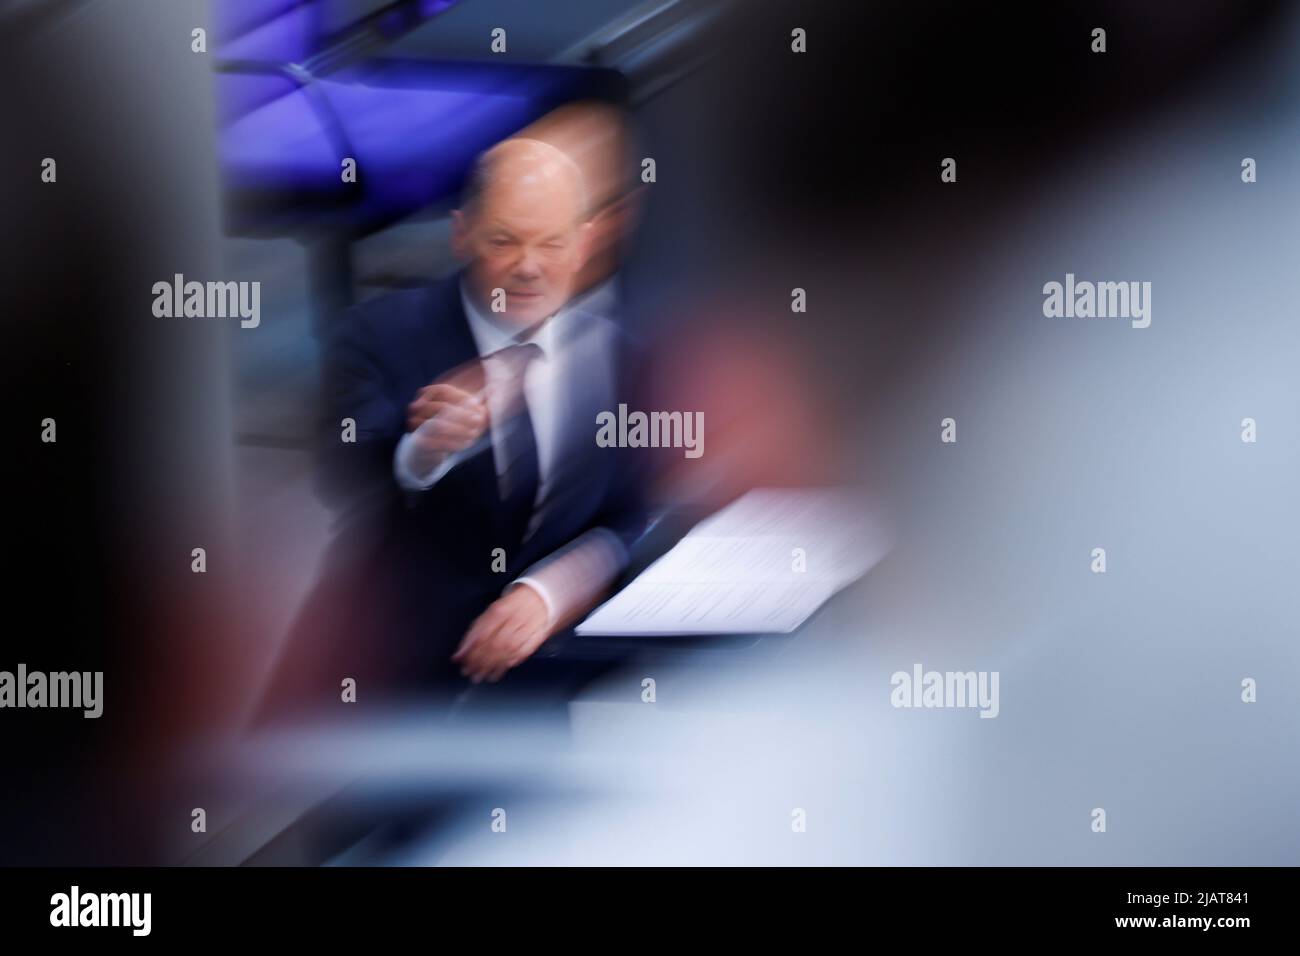 German Chancellor Olaf Scholz speaks during a session of Germany's lower house of parliament, the Bundestag, in Berlin, Germany June 1, 2022. Picture taken using slow shutter speed. REUTERS/Hannibal Hanschke Stock Photo